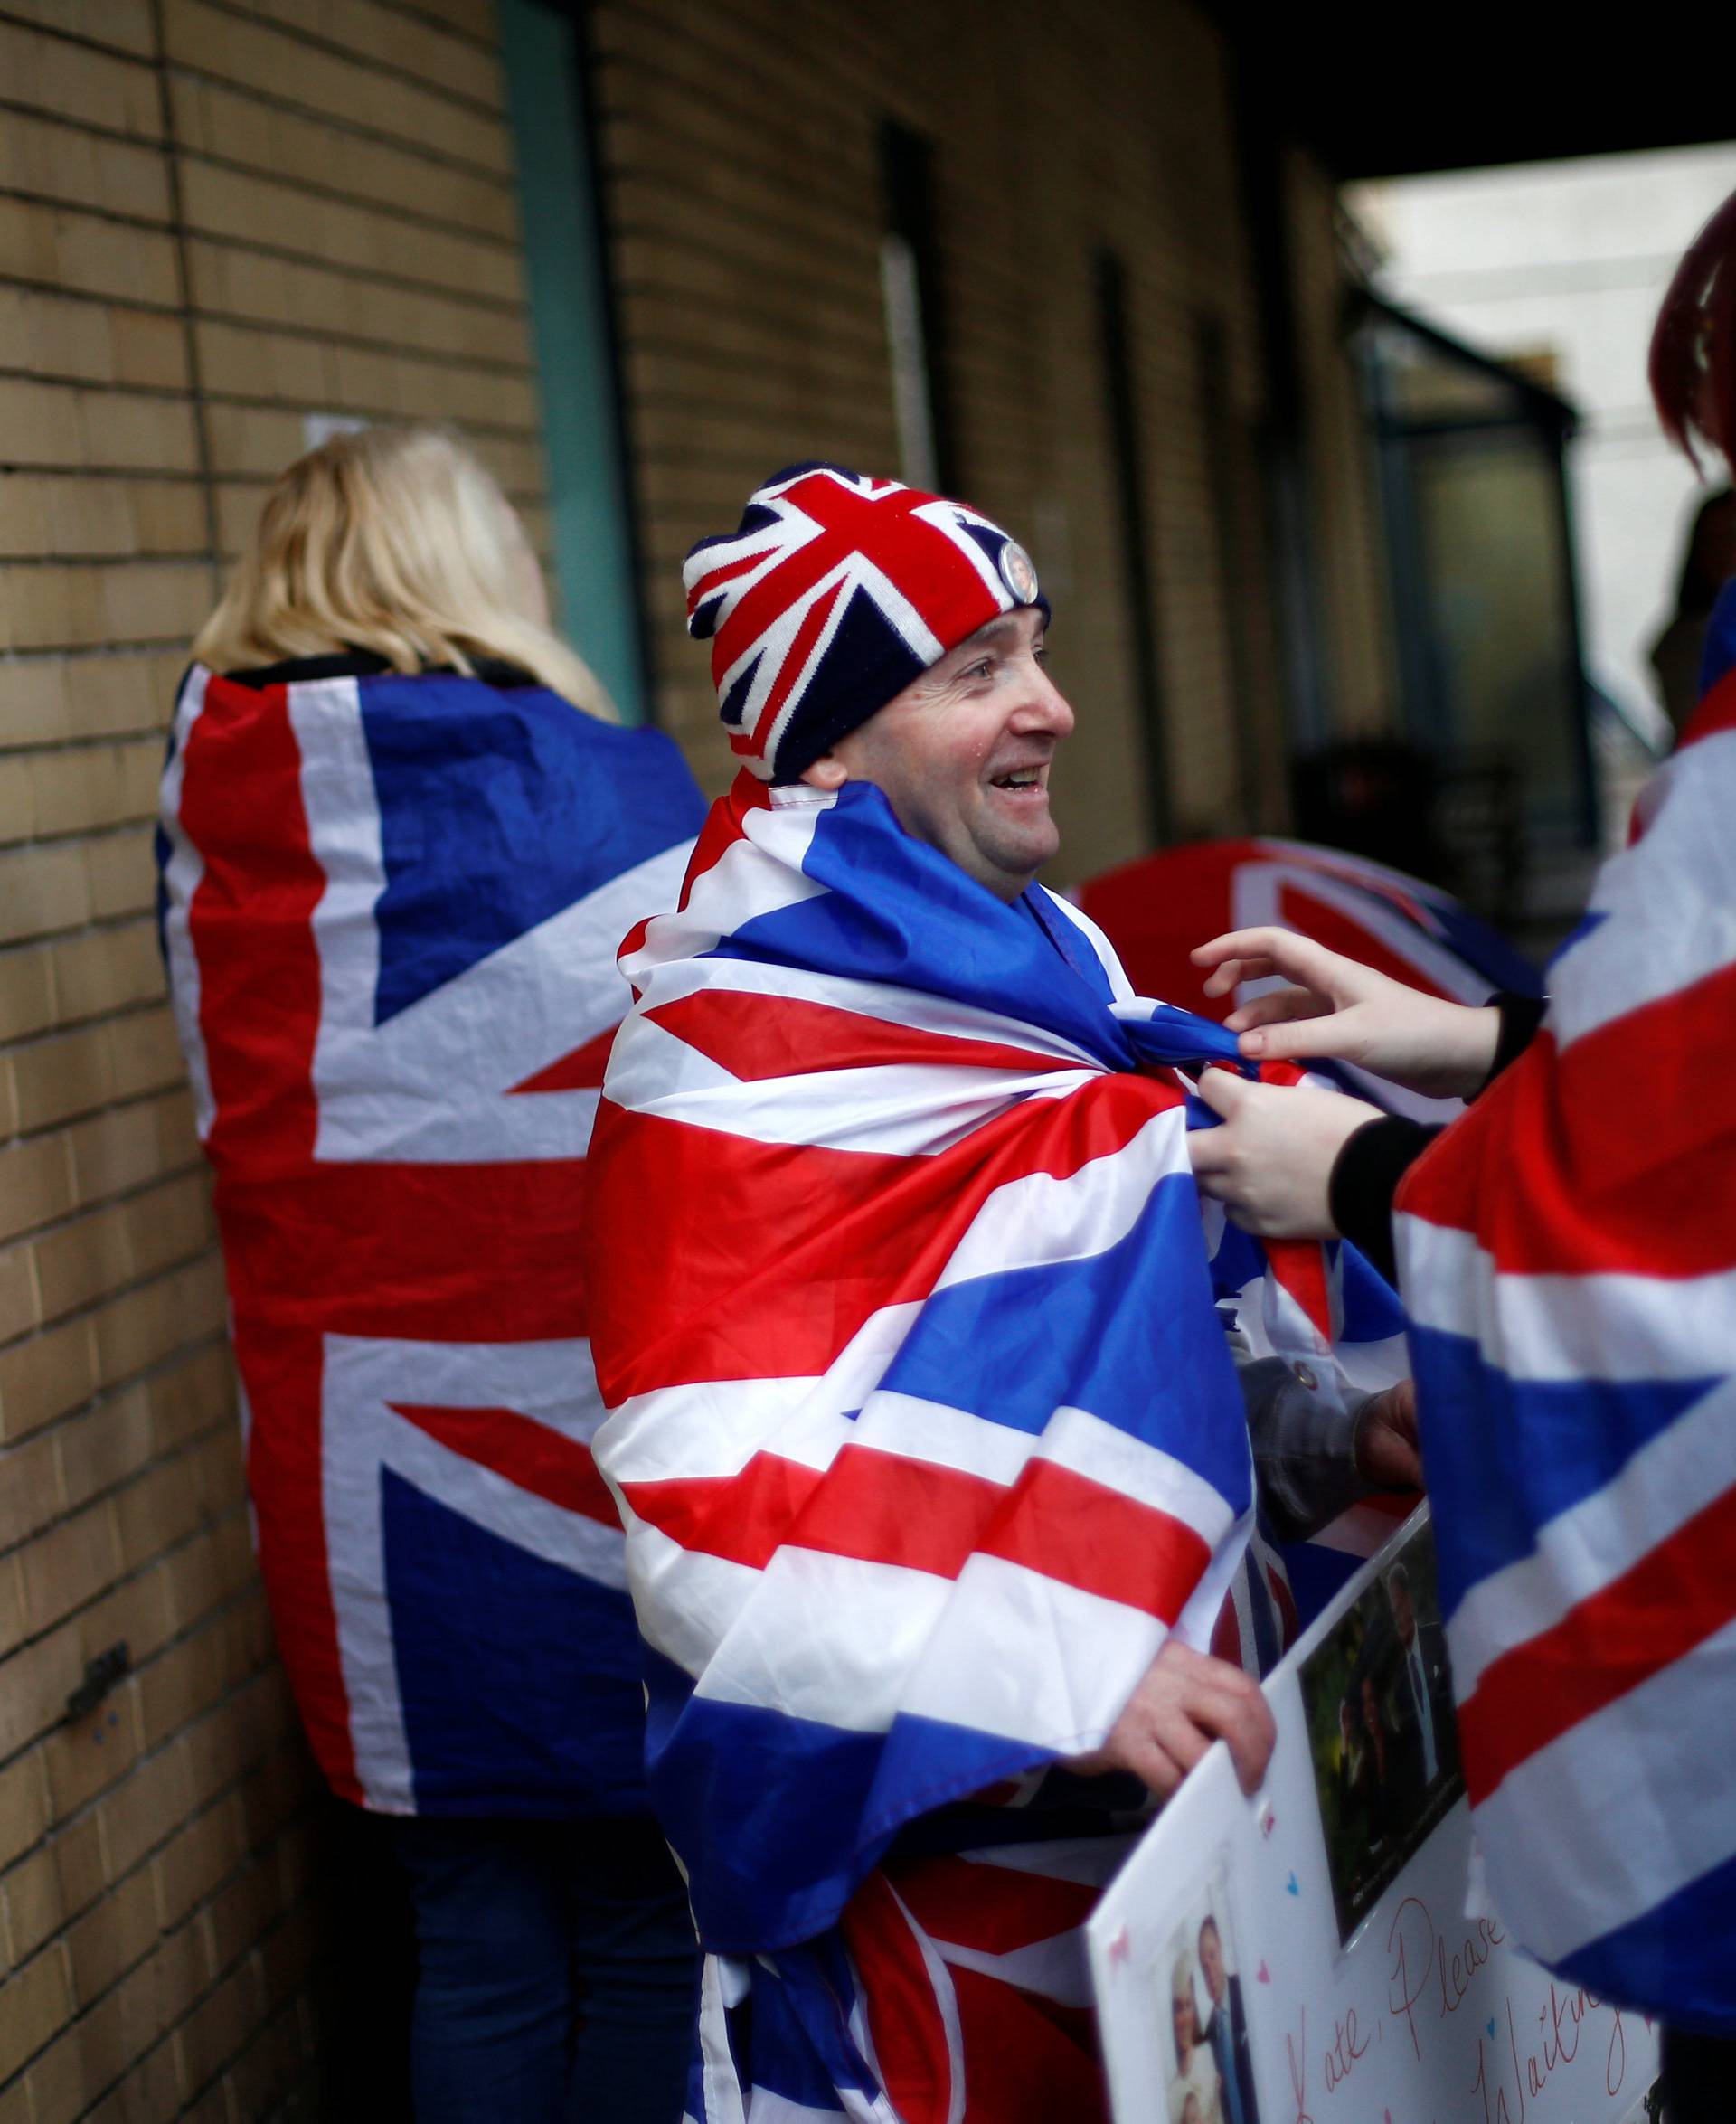 Fans of Britain's royal family stand outside the hospital where Catherine, the Duchess of Cambridge, is due to give birth, in London